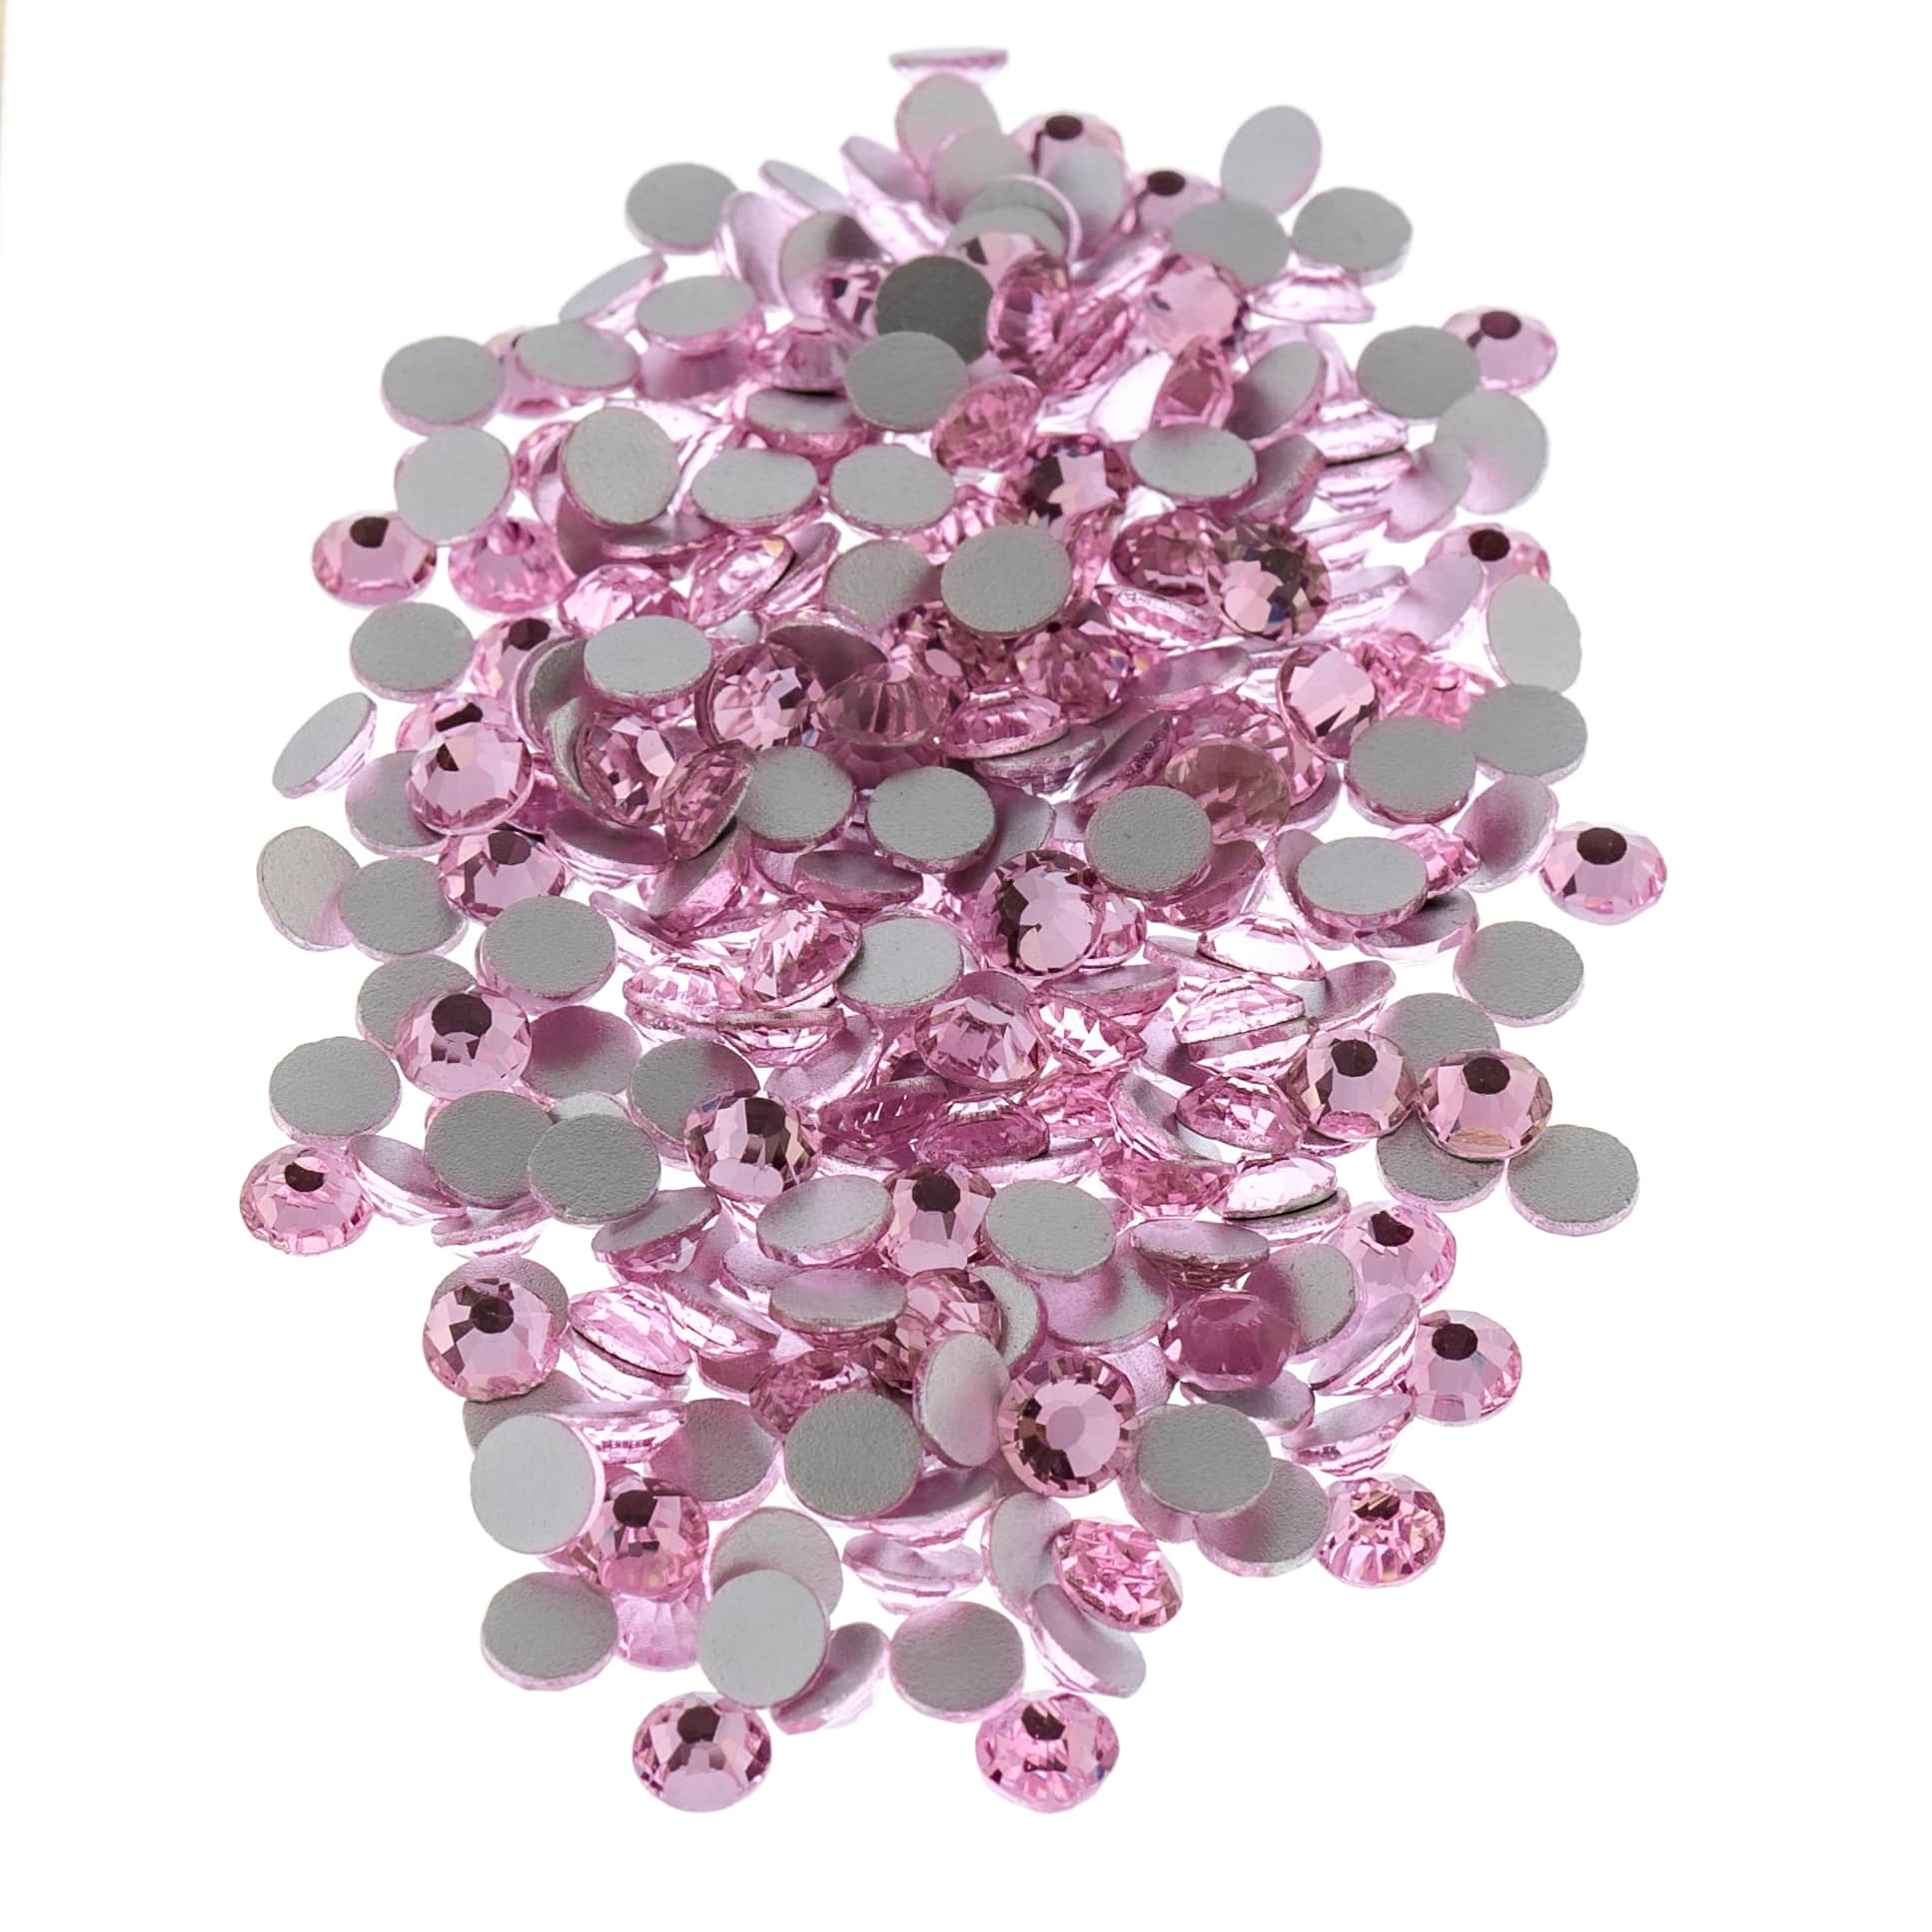 Faceted Oval Craft Rhinestones (pack of 20) - Hobby Monsters